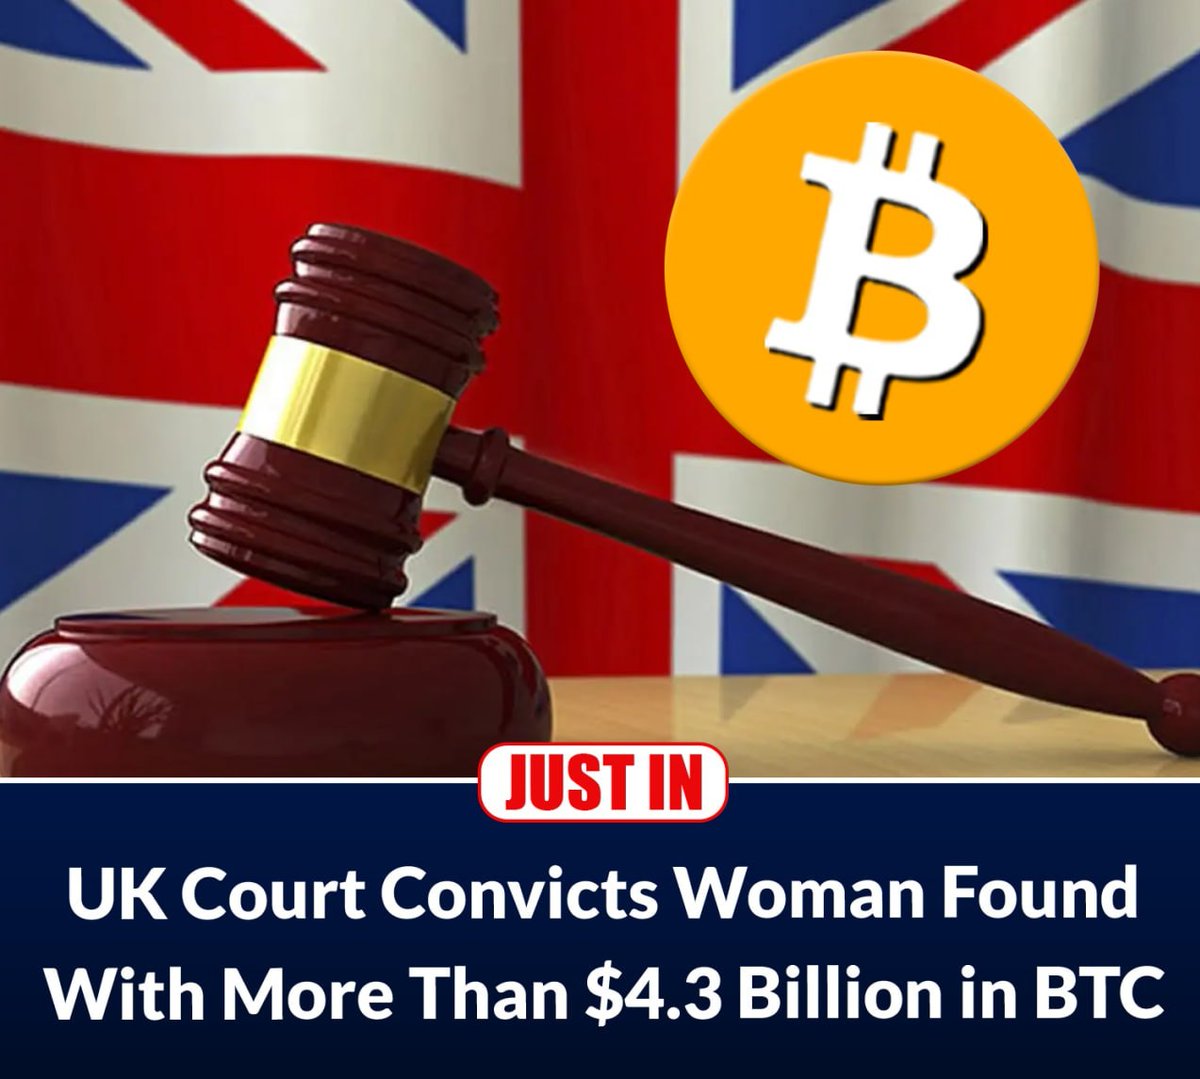 JUST IN: 🇬🇧 UK Court Convicts Woman Found With More Than $4.3 Billion in $BTC.

#Ukcrypto #Bitcoin #Altacoin #CryproNews